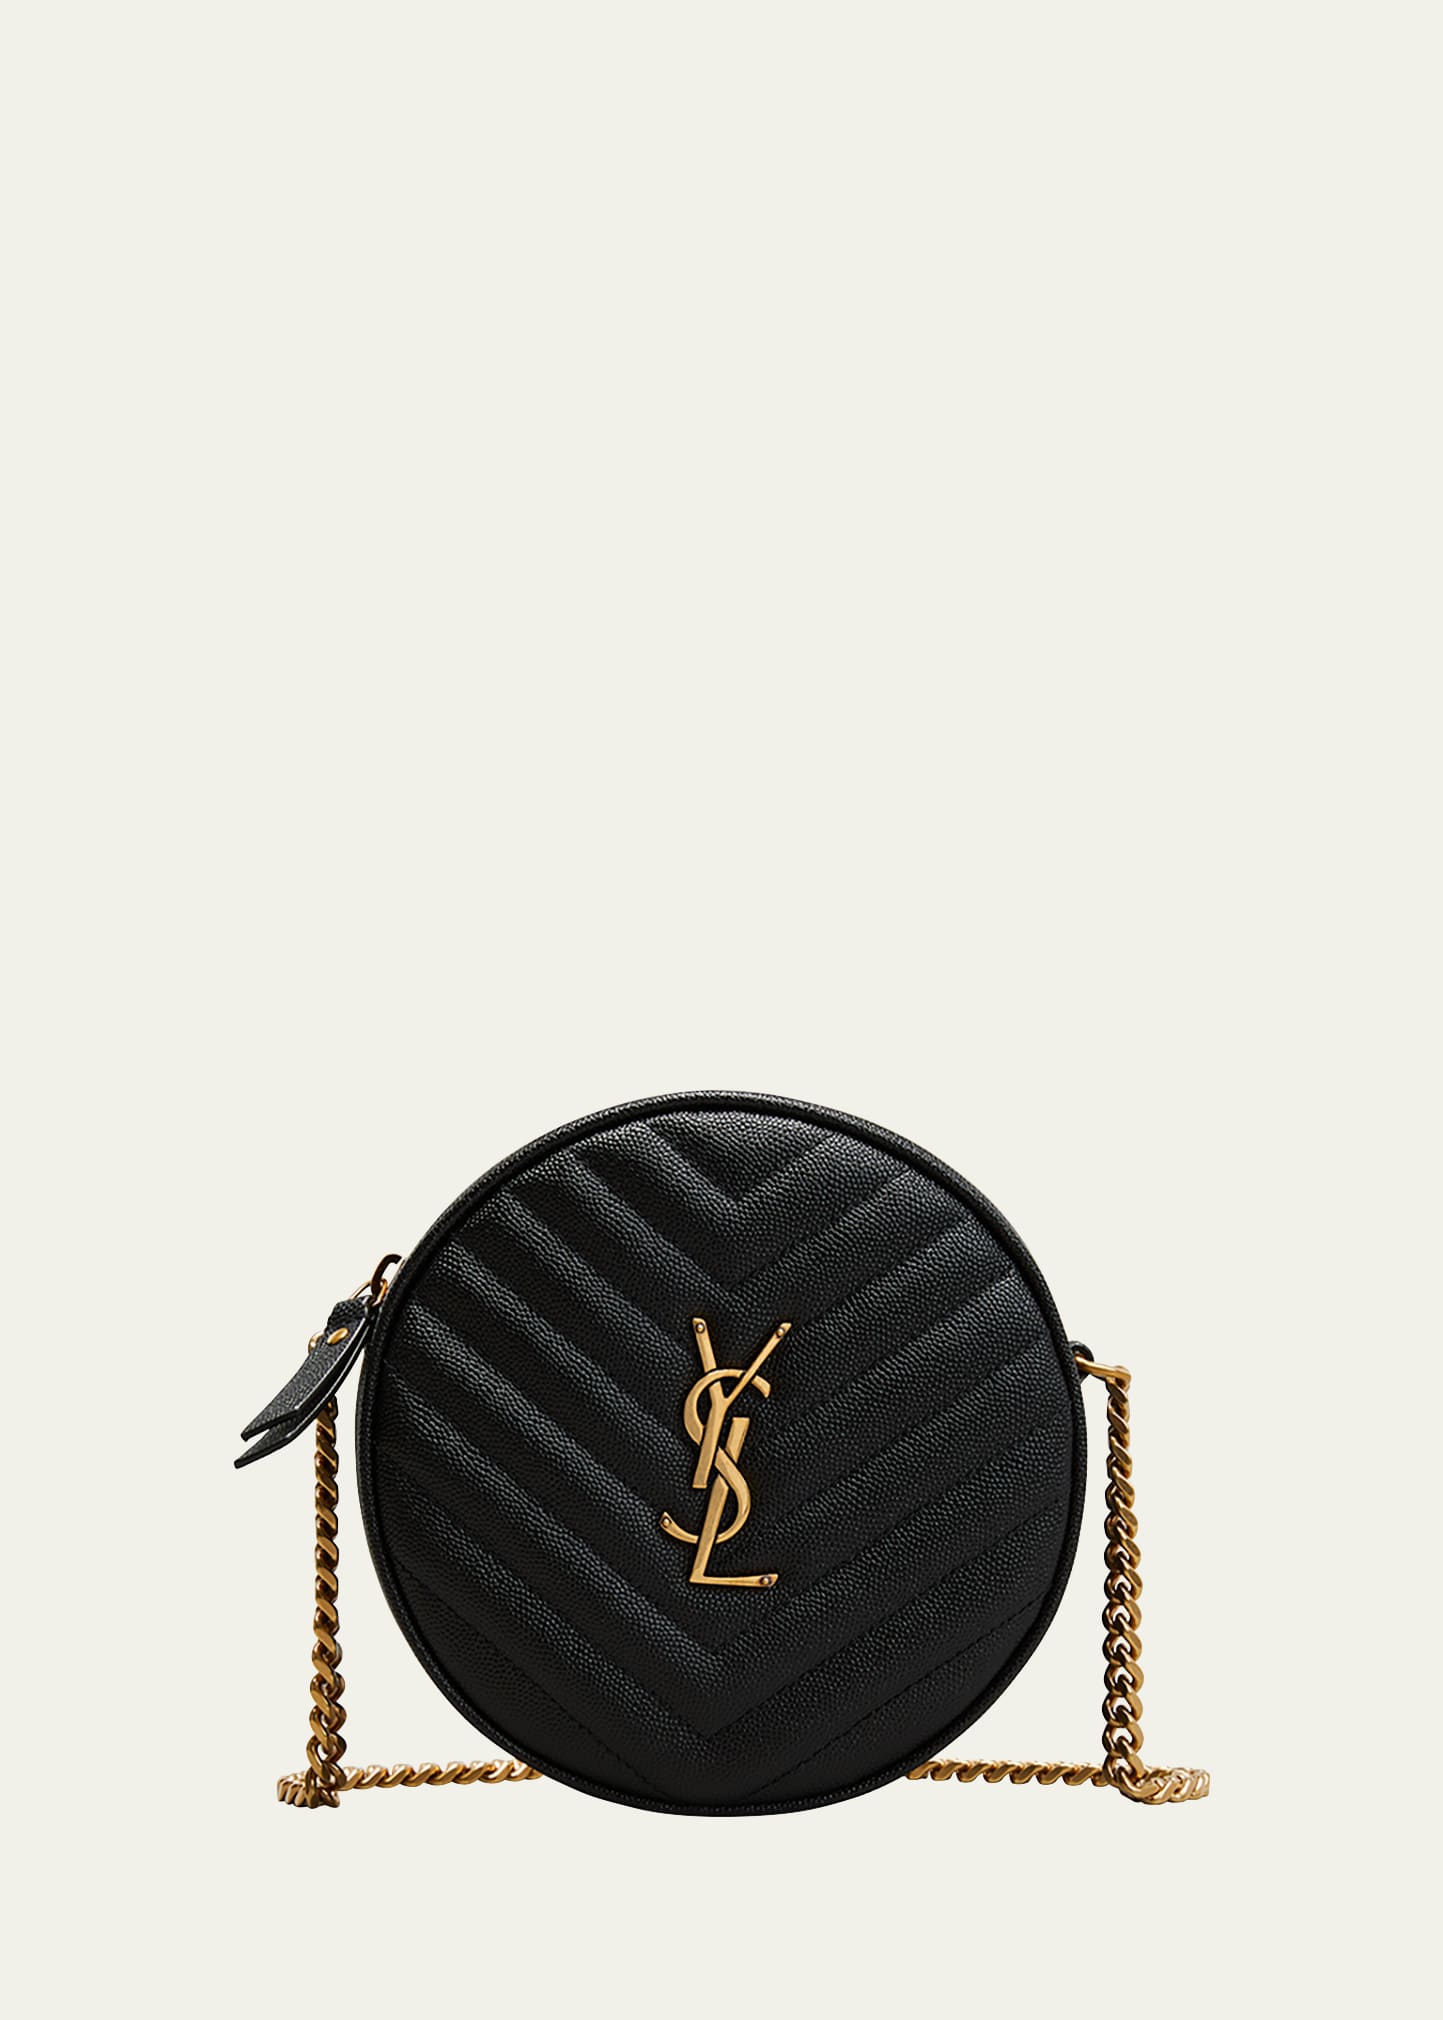 Saint Laurent - Circle Quilted Textured-leather Bag - Black